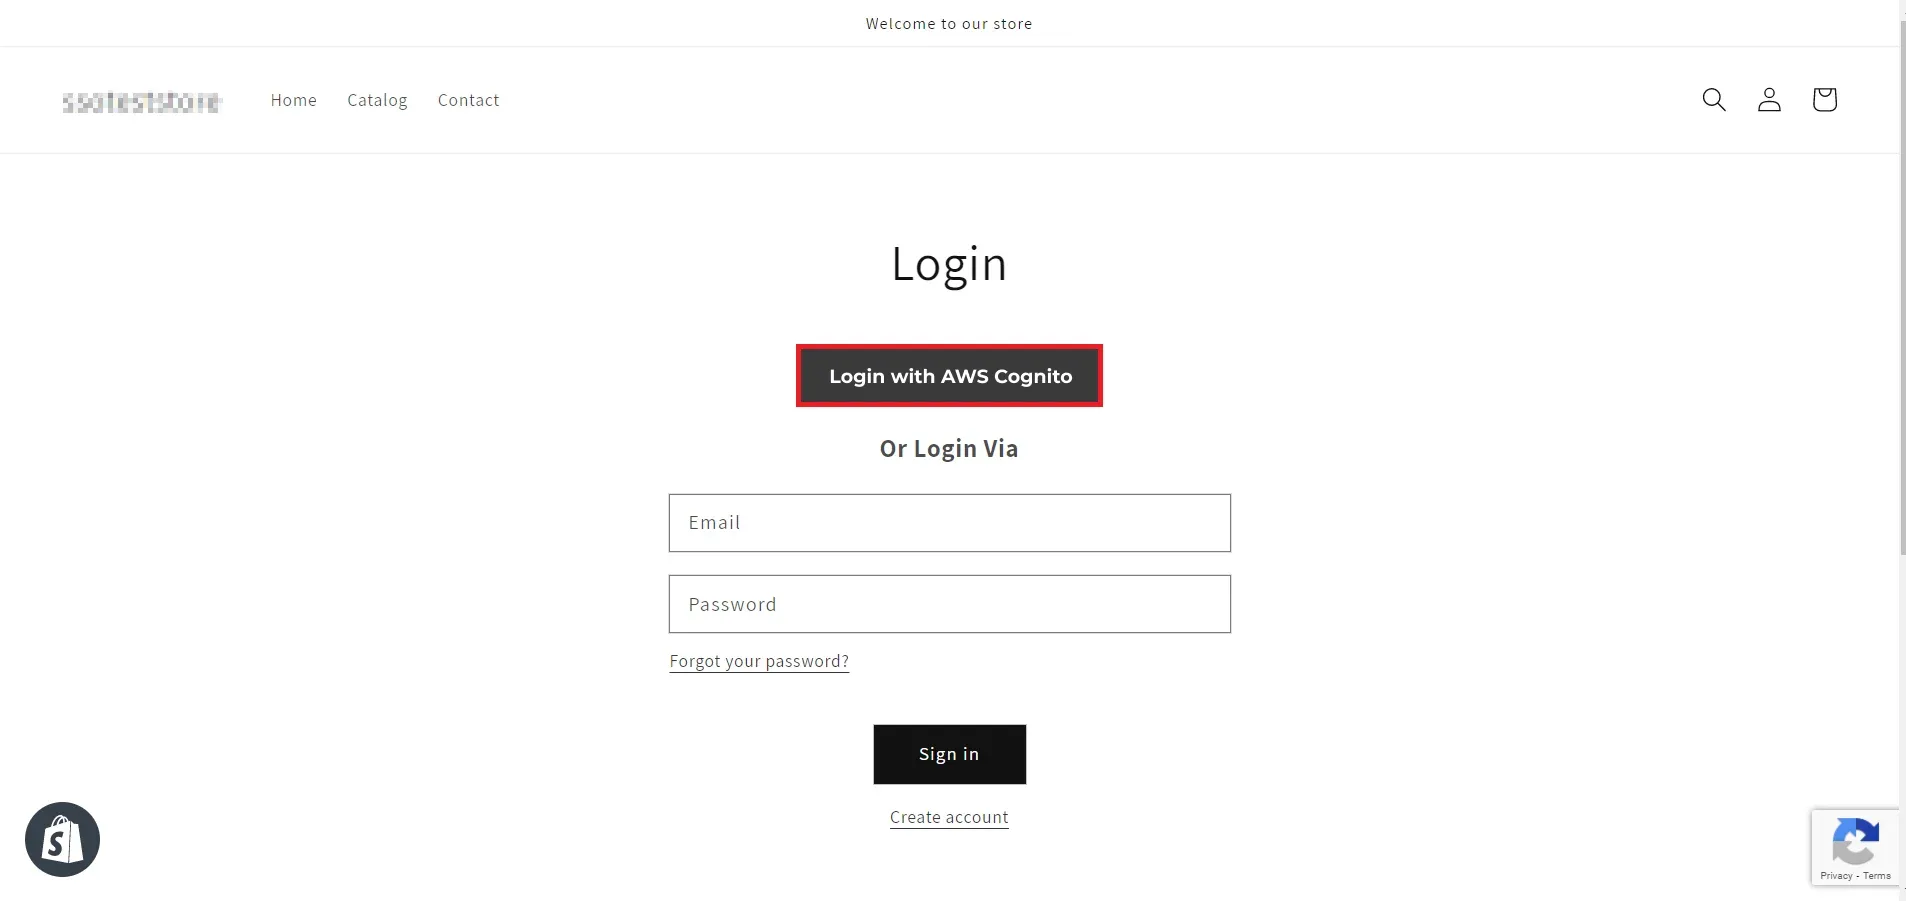 Azure AD B2C Shopify (SSO) - click on login button